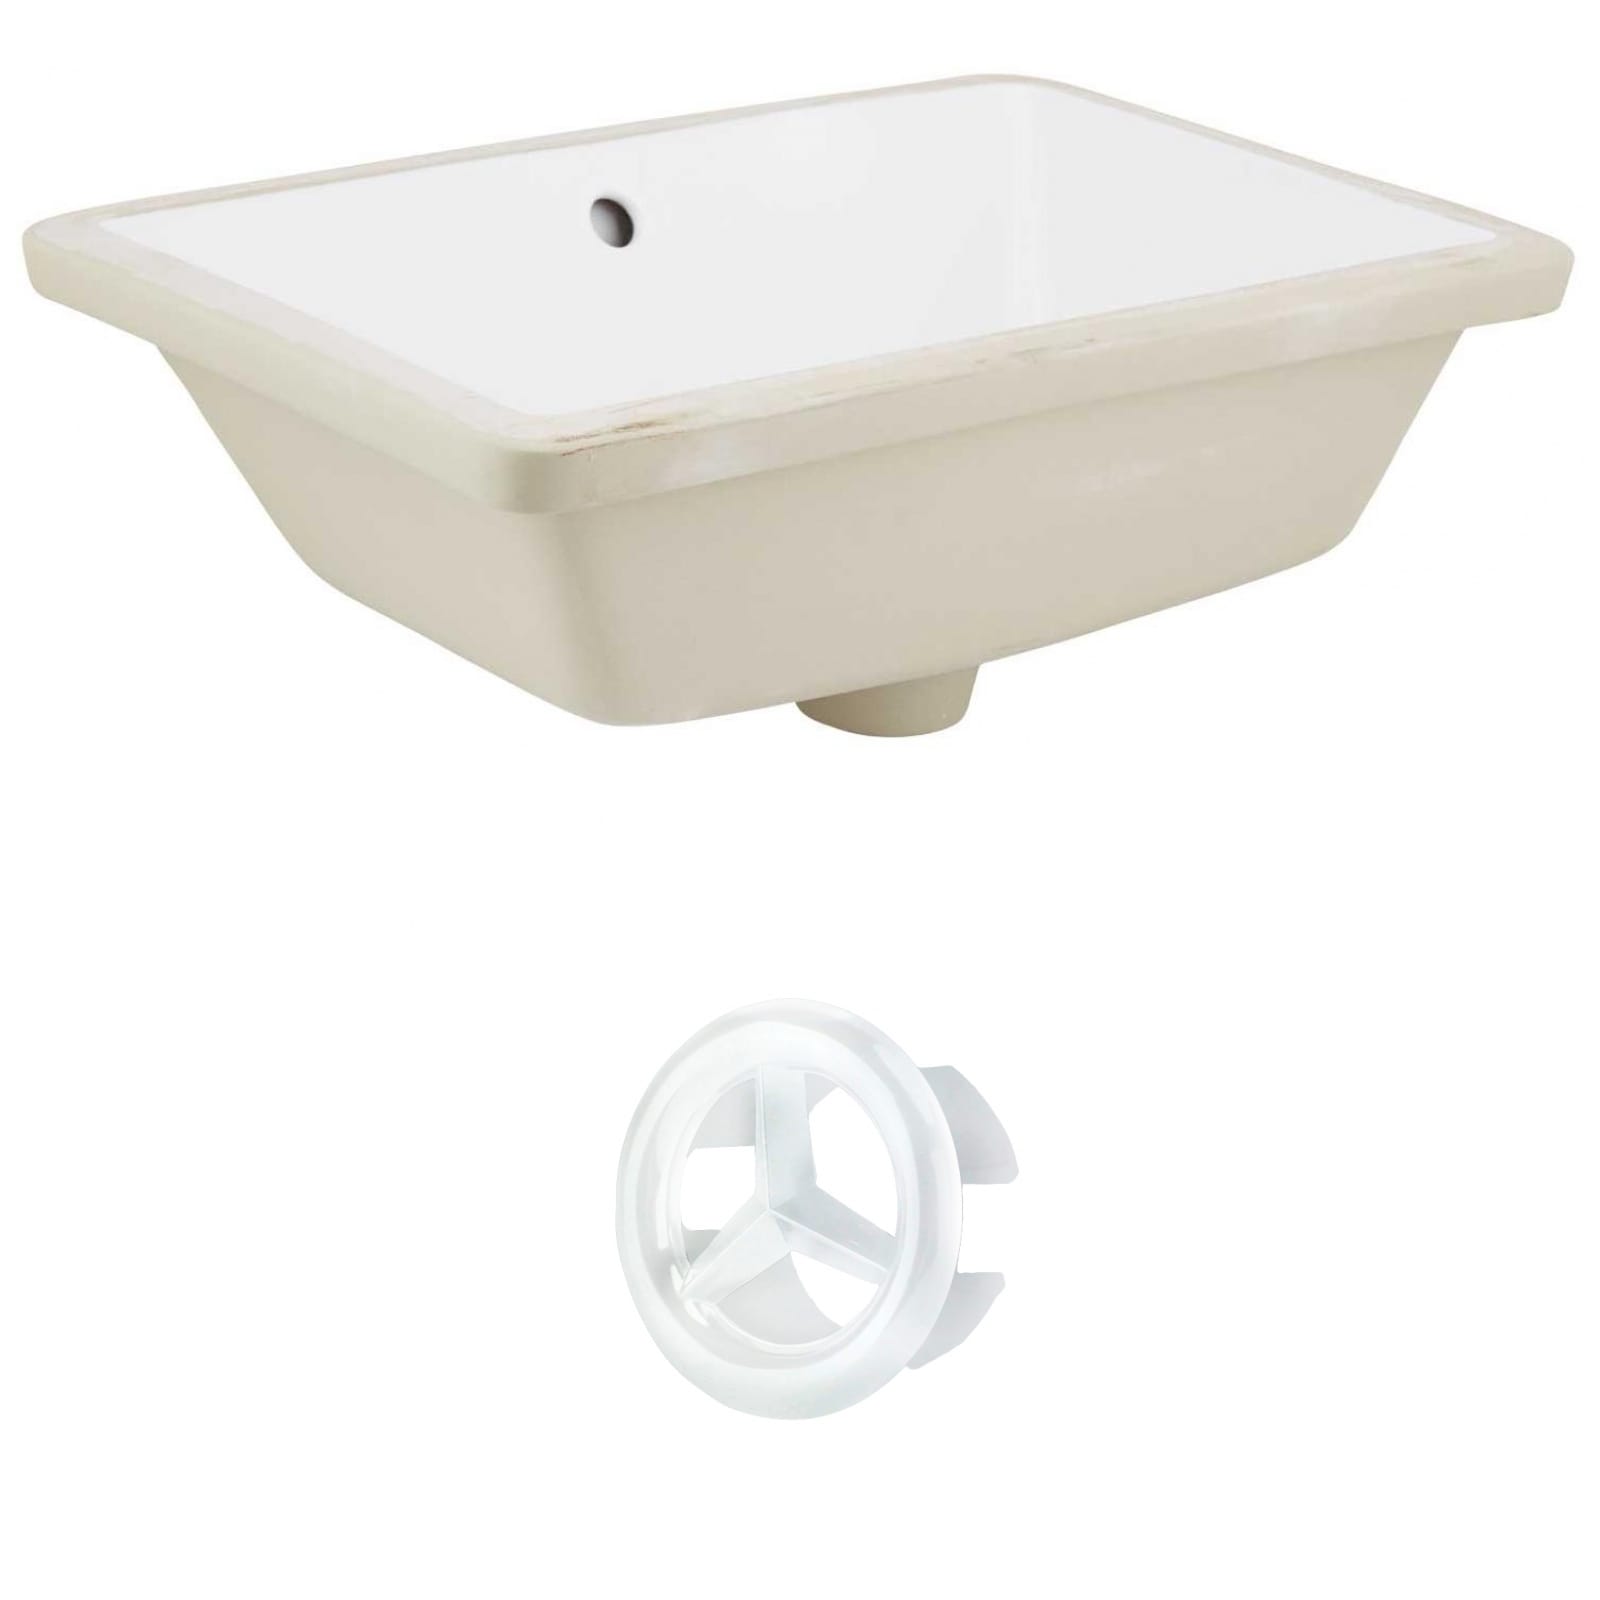 https://ak1.ostkcdn.com/images/products/is/images/direct/daa14e0e7fb0044d570e934da228ba8d02dda847/18.25-in.-W-Rectangle-Undermount-Sink-Set-In-White---White-Hardware.jpg